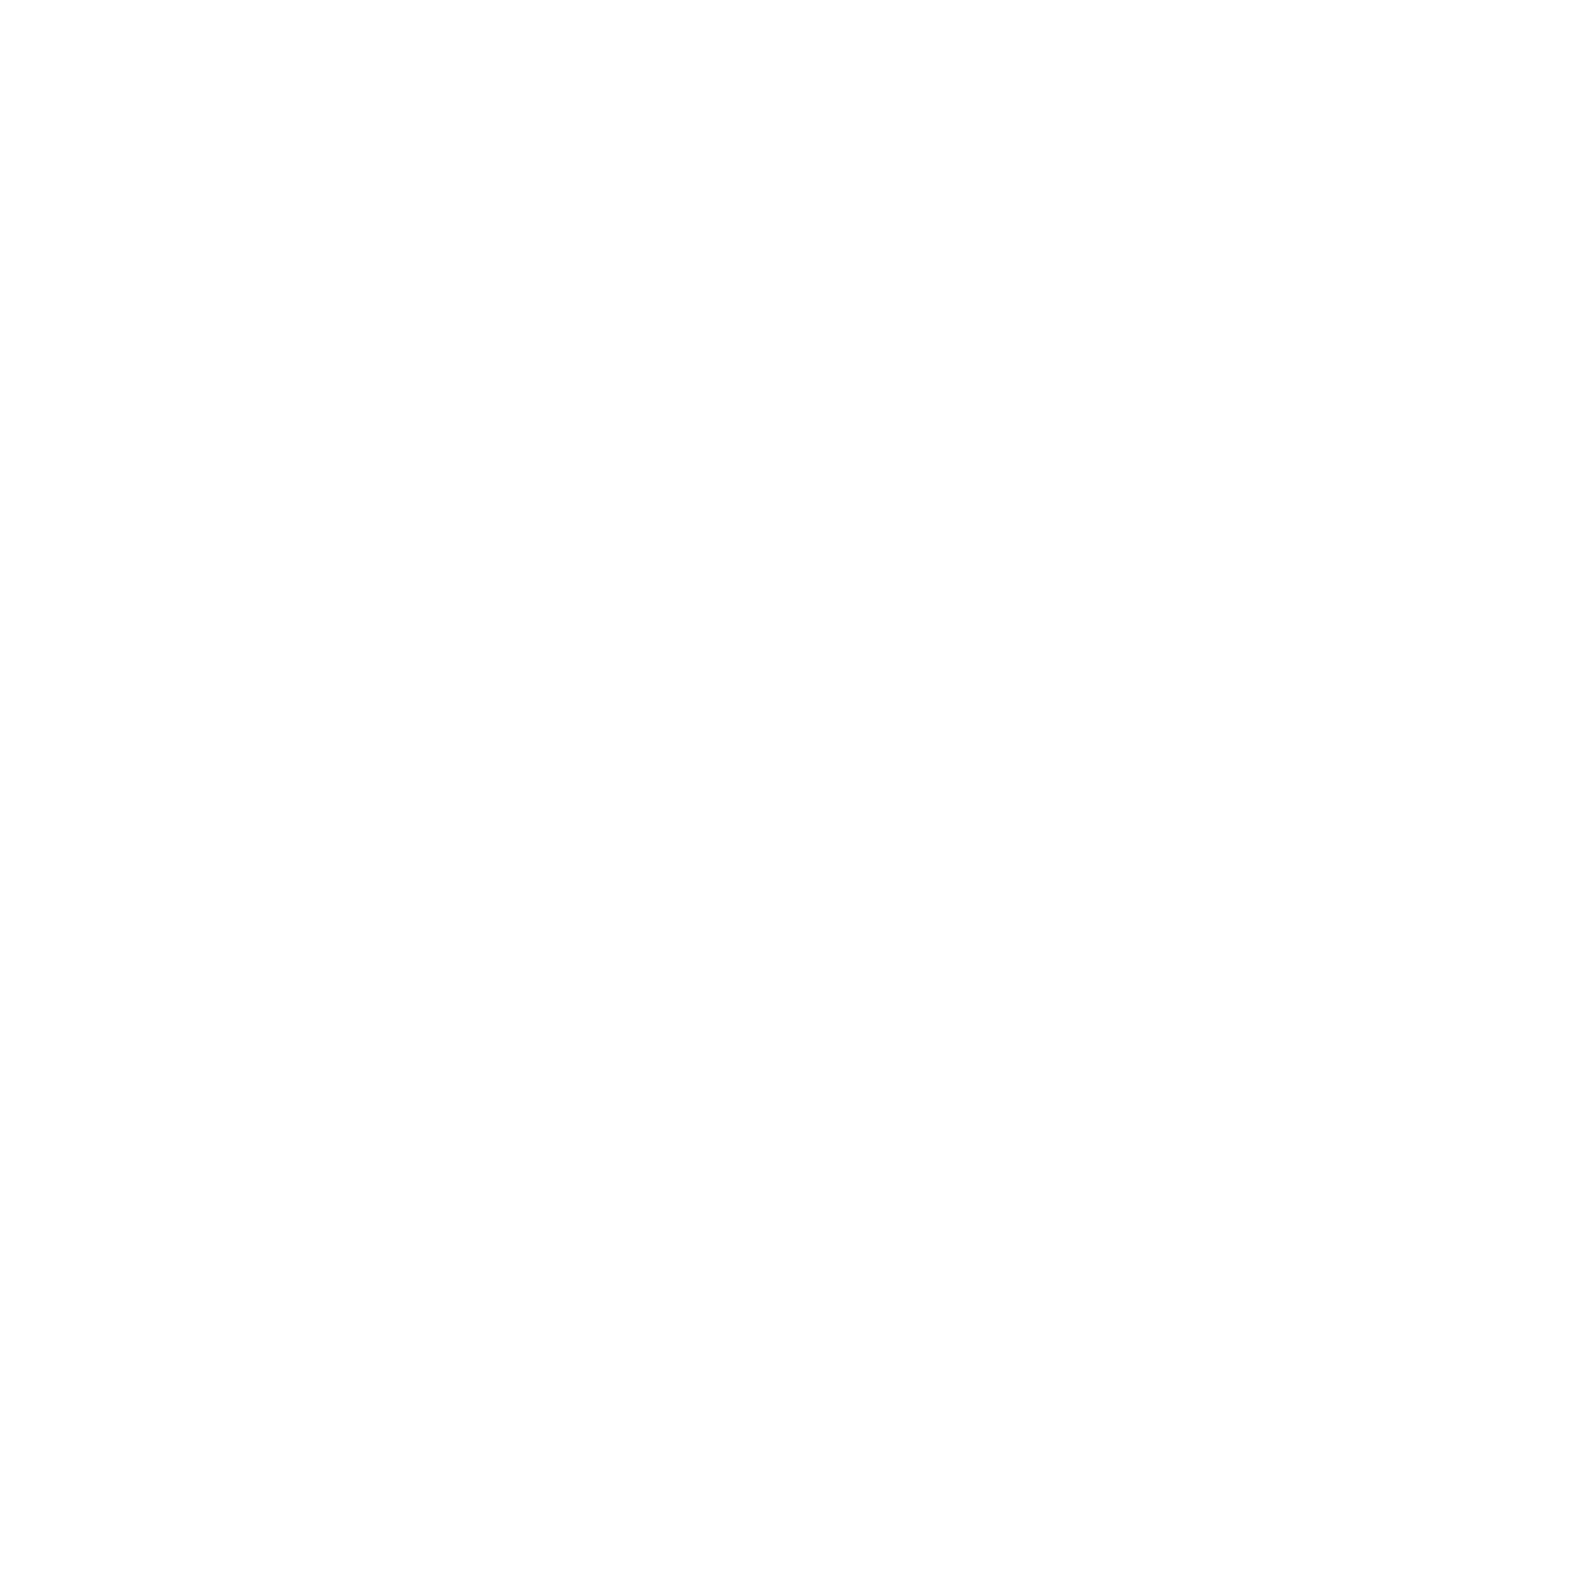 Guess logo for dark backgrounds (transparent PNG)